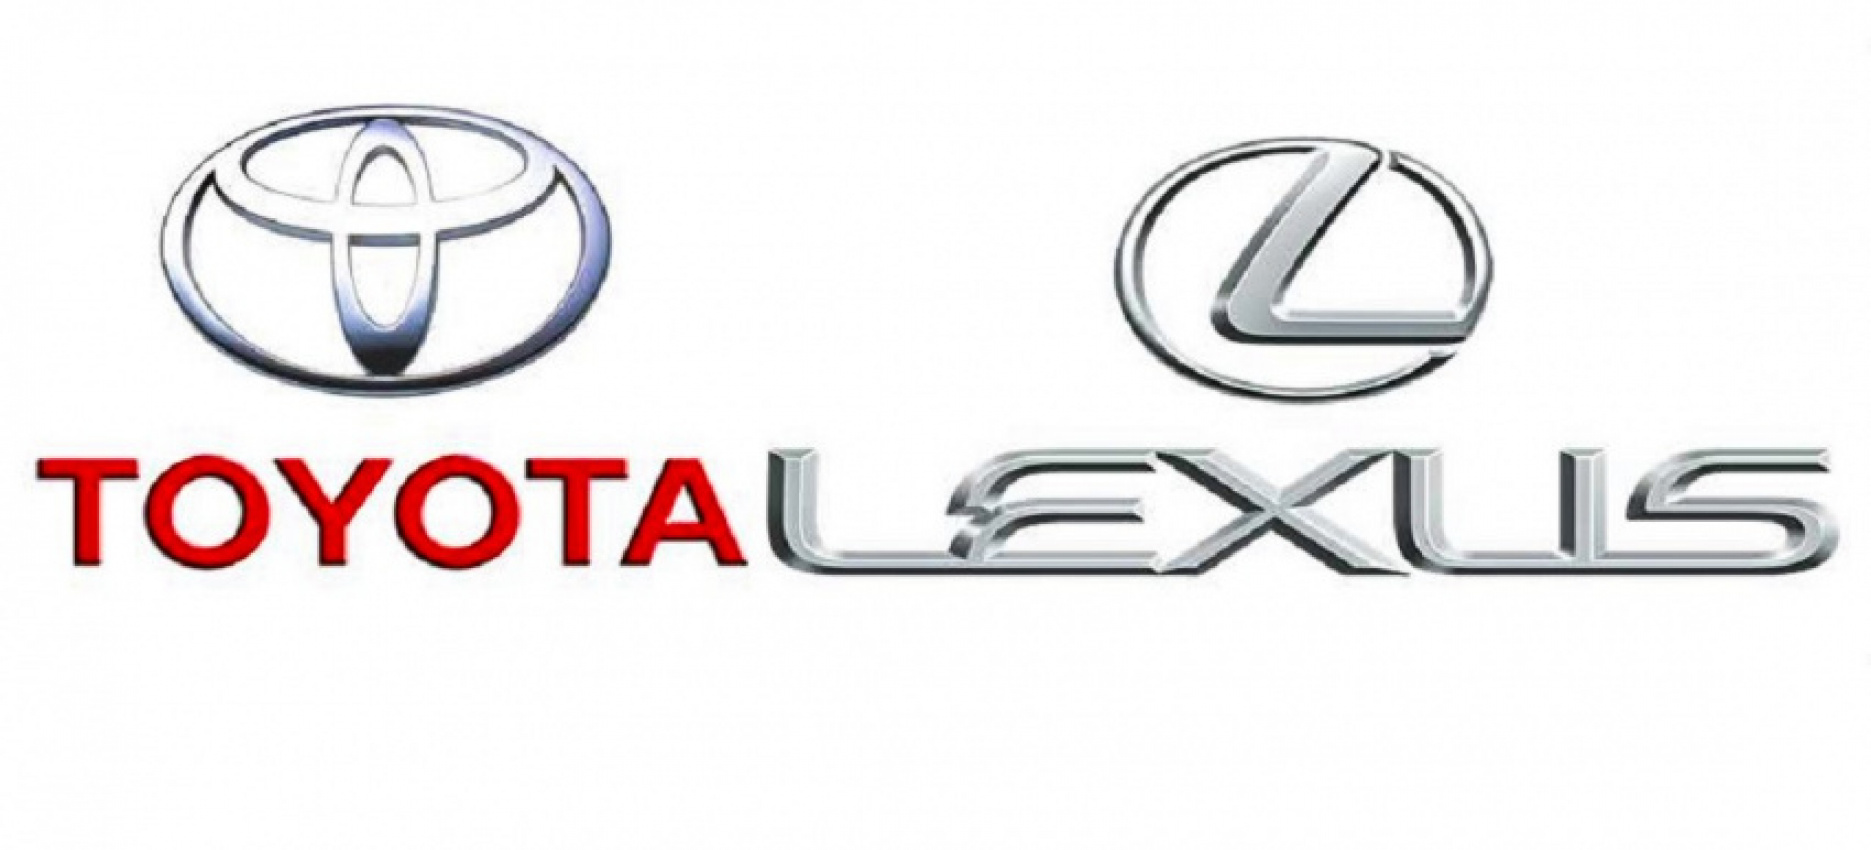 autos, car brands, cars, lexus, toyota, aftersales, dealers, dealership, dealerships, lexus malaysia, malaysia, movement control order, pandemic, sales, service centres, umw toyota motor, toyota and lexus dealerships in malaysia to resume business from 4 may 2020